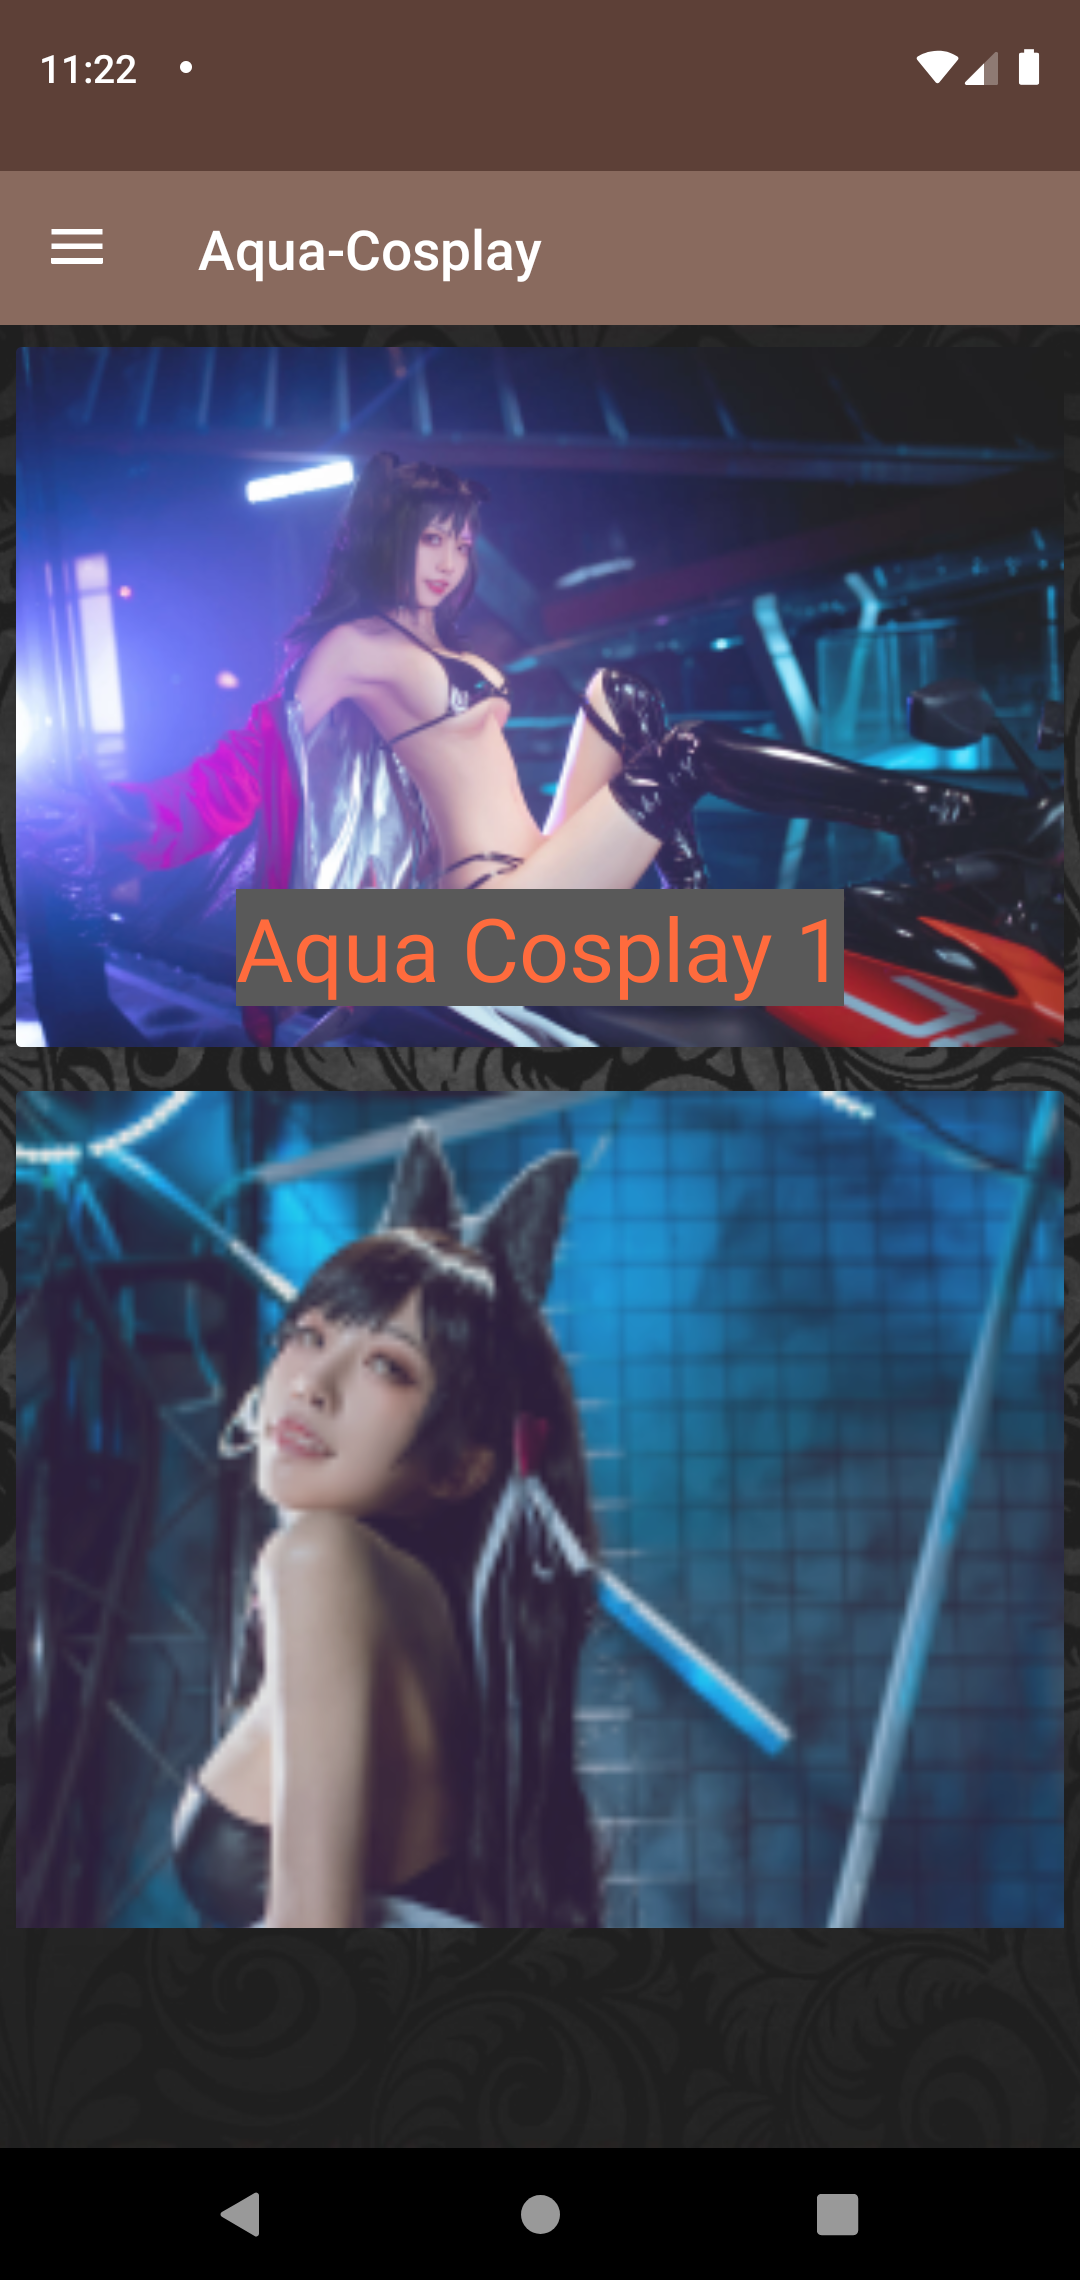 Aqua Cosplay porn,anime,picture,apps,pics,search,mobile,henati,mature,galleries,hentai,pic,pictures,wallpapers,gallery,cosplay,download,collection,star,photos,app,hantai